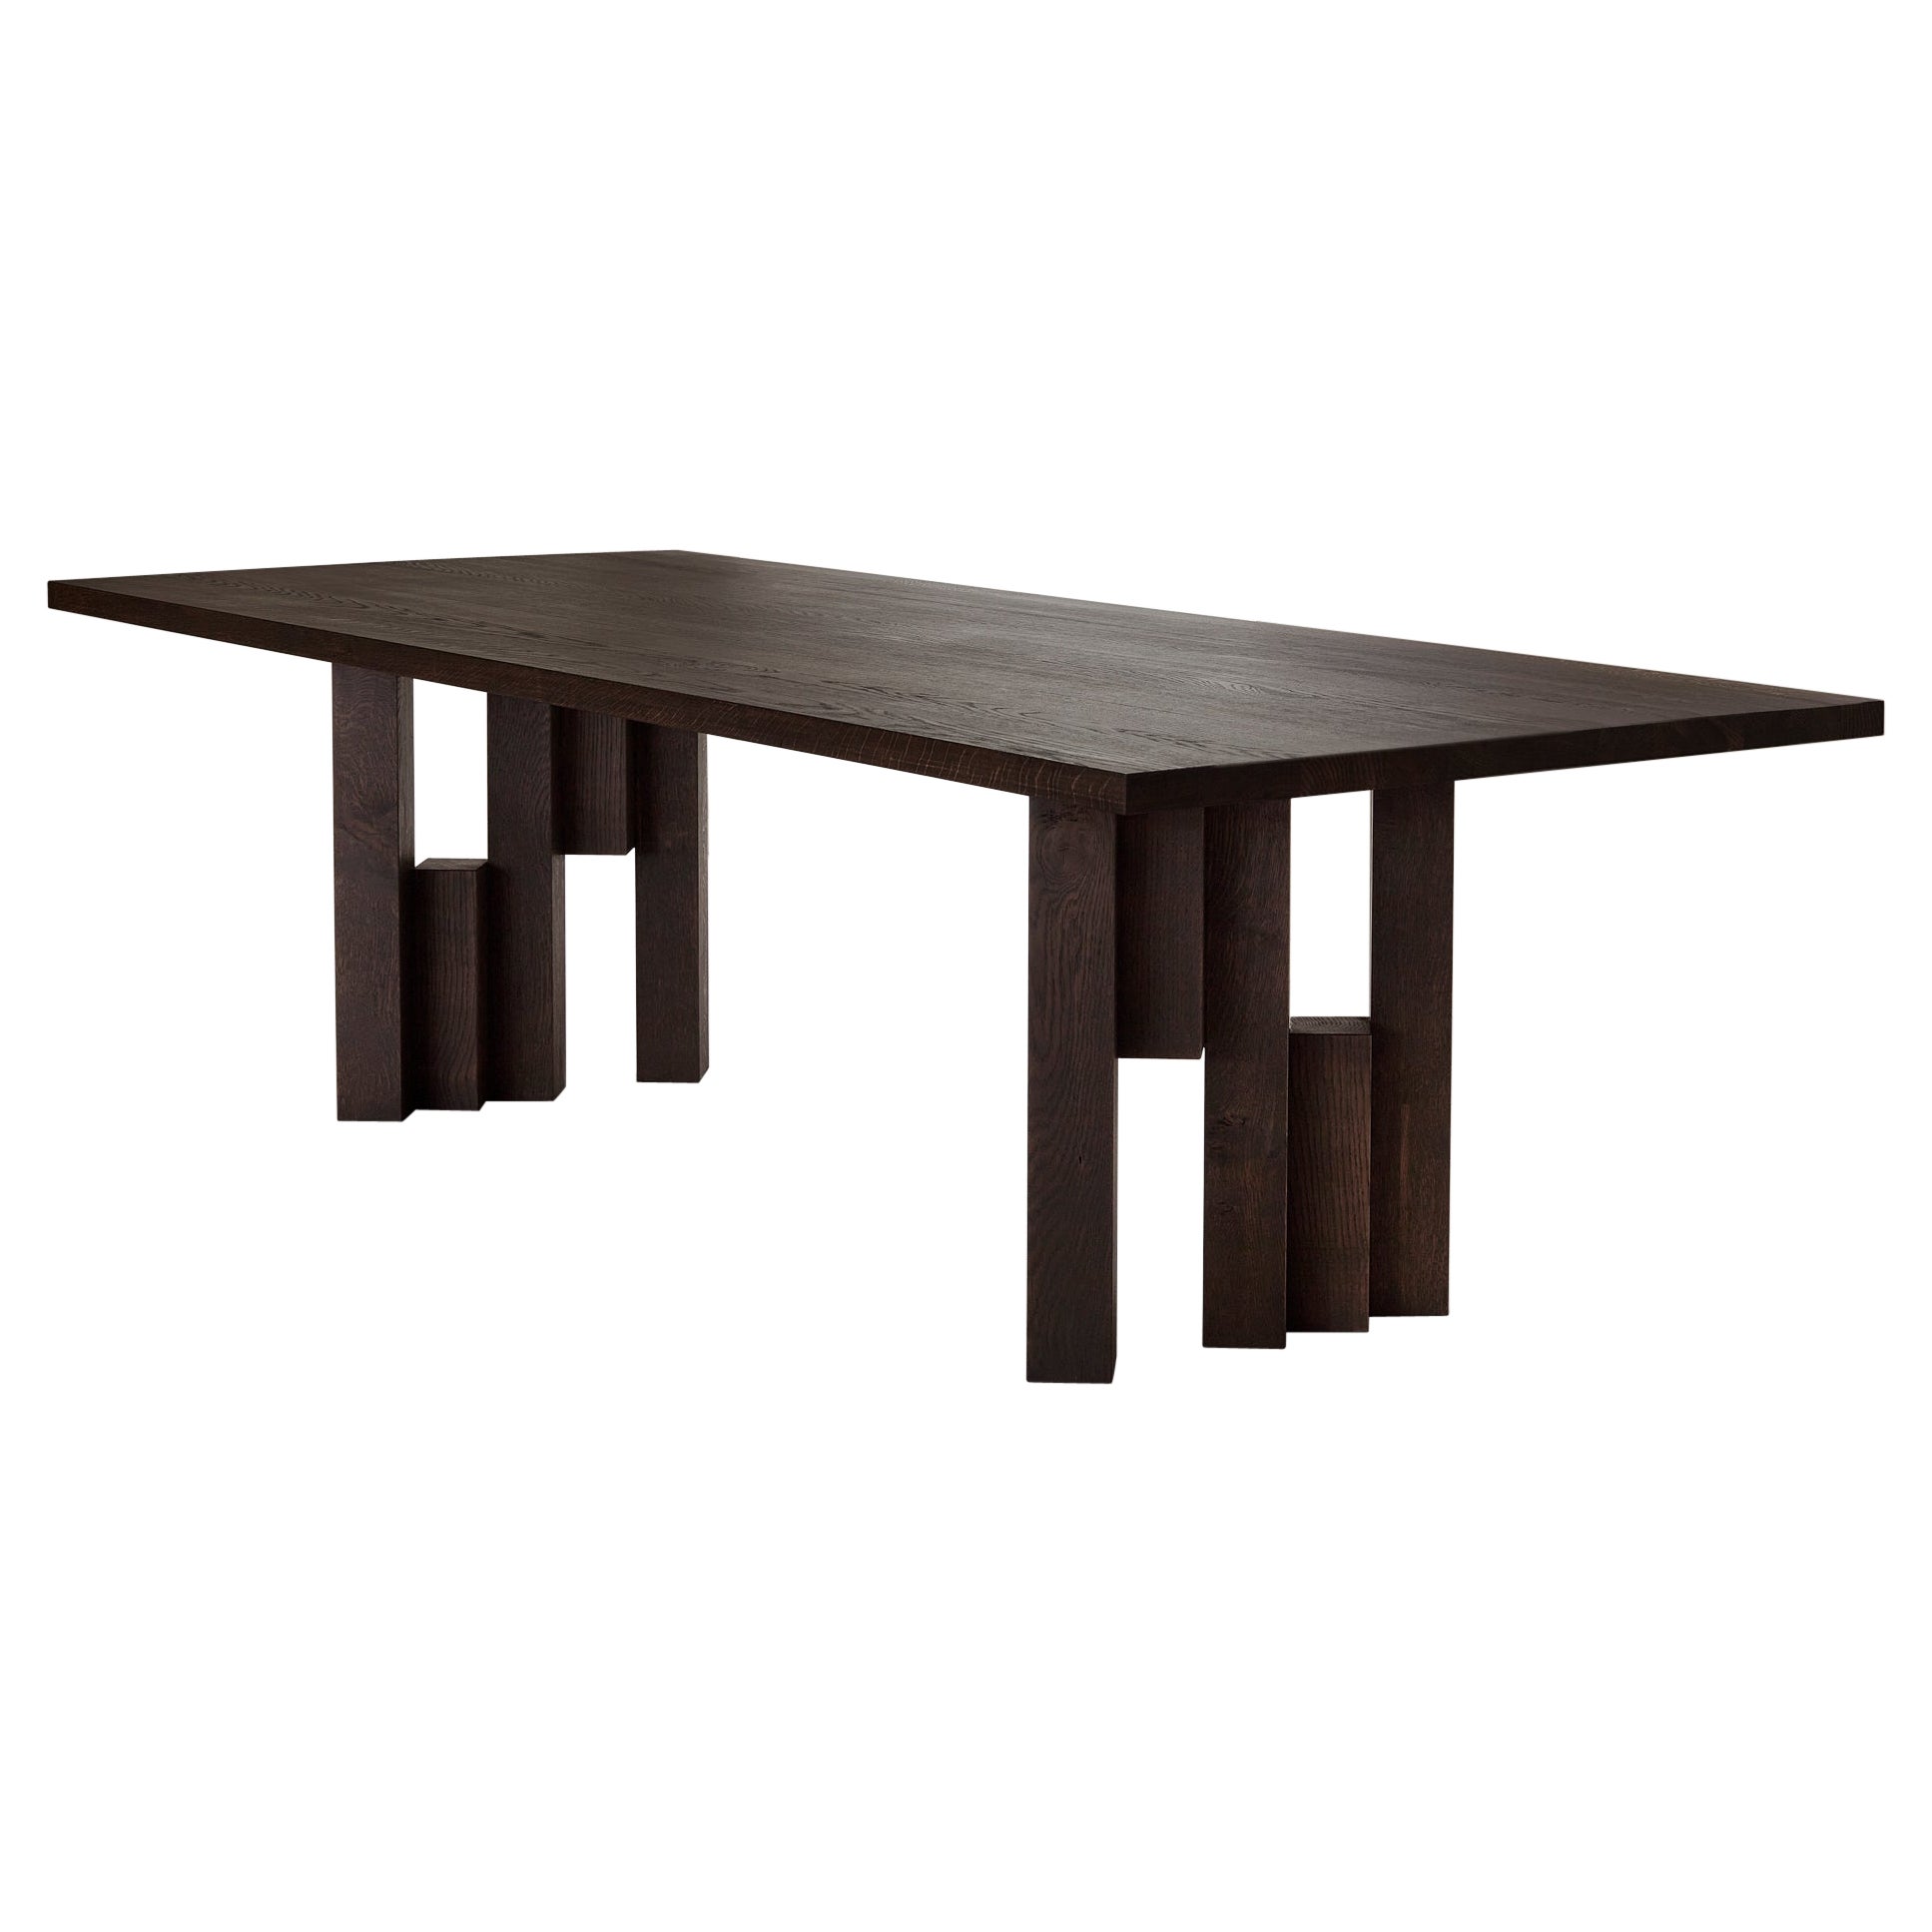 Contemporary Modernist Solid Oak Wooden Dining Table - Fenestra by Mokko For Sale